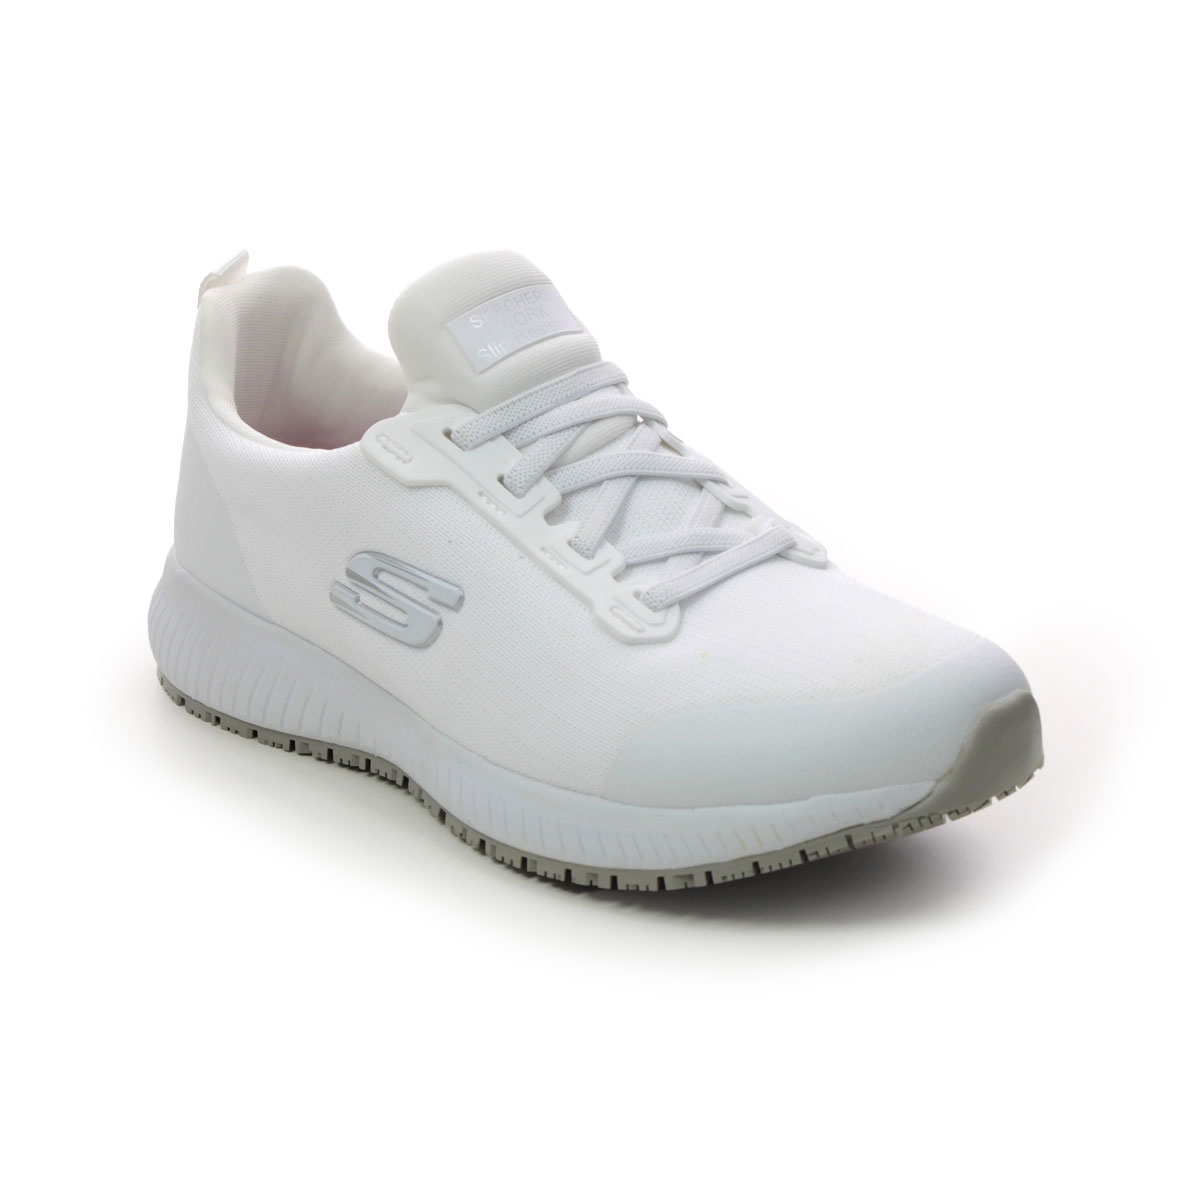 Skechers Work Squad Slip Resistant White Womens Trainers 77222Ec In Size 7 In Plain White